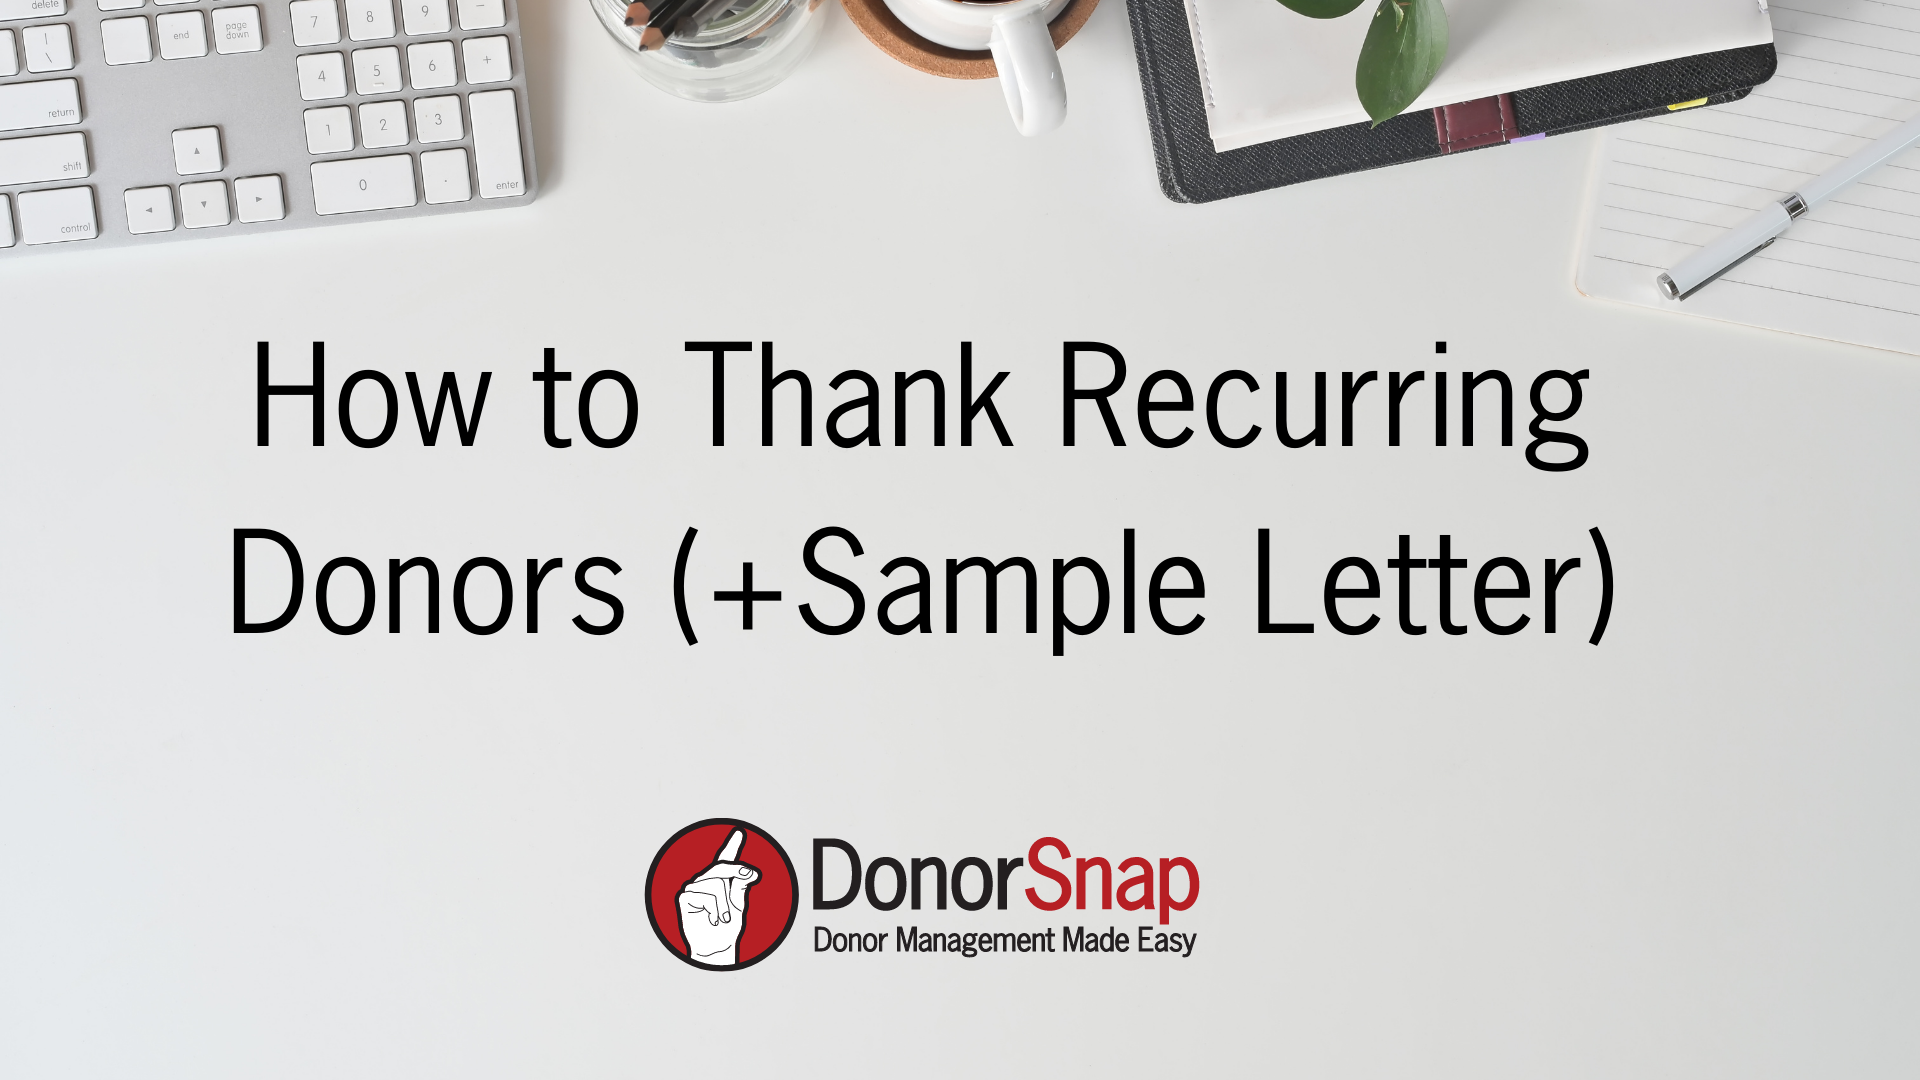 How to Write The BEST Thank-You Letter for Donations (+3 Templates